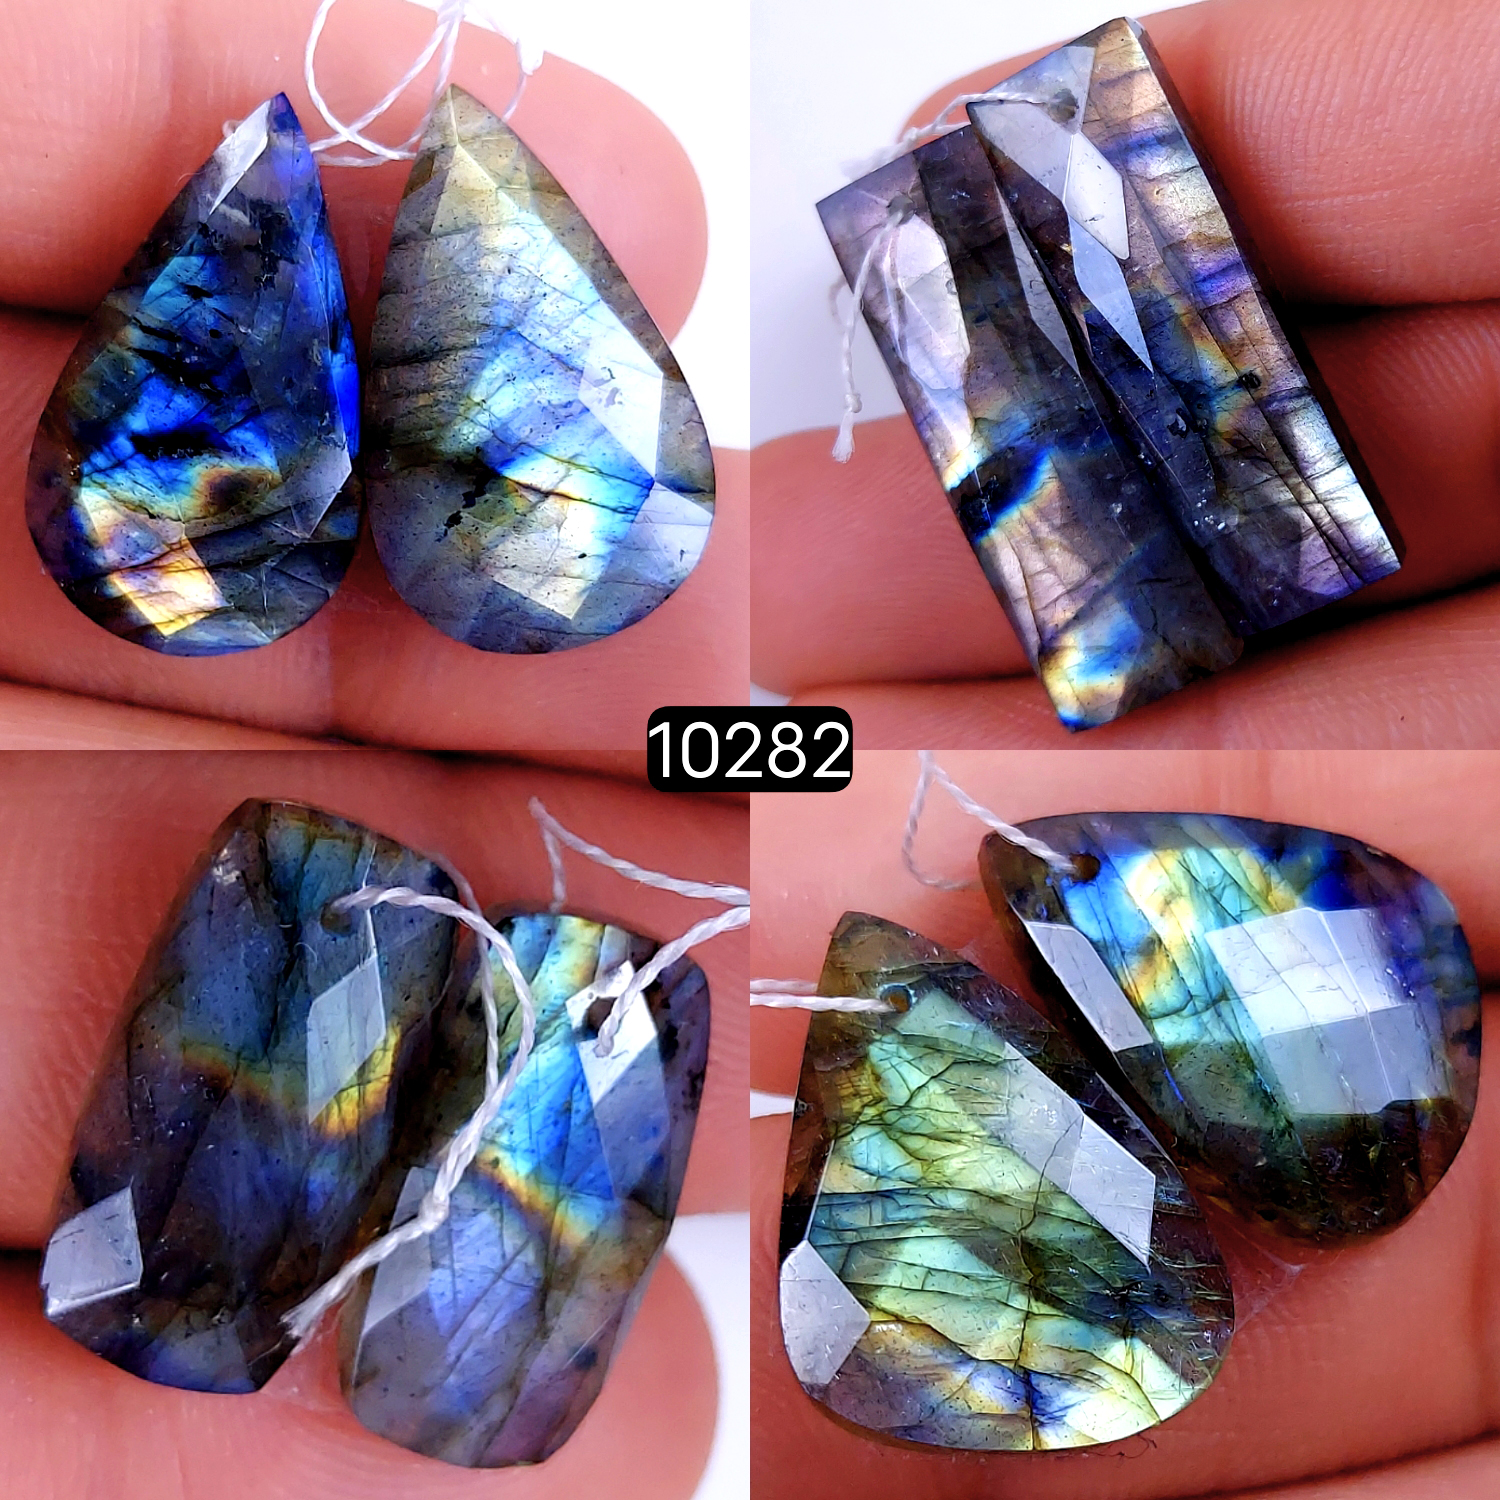 4Pair 115Cts Natural Labradorite Faceted Crystal Drill Dangle Drop Earring Pairs Silver Earrings Rose cut Labradorite Hoop Jewelry  30X10 20X10mm #10282